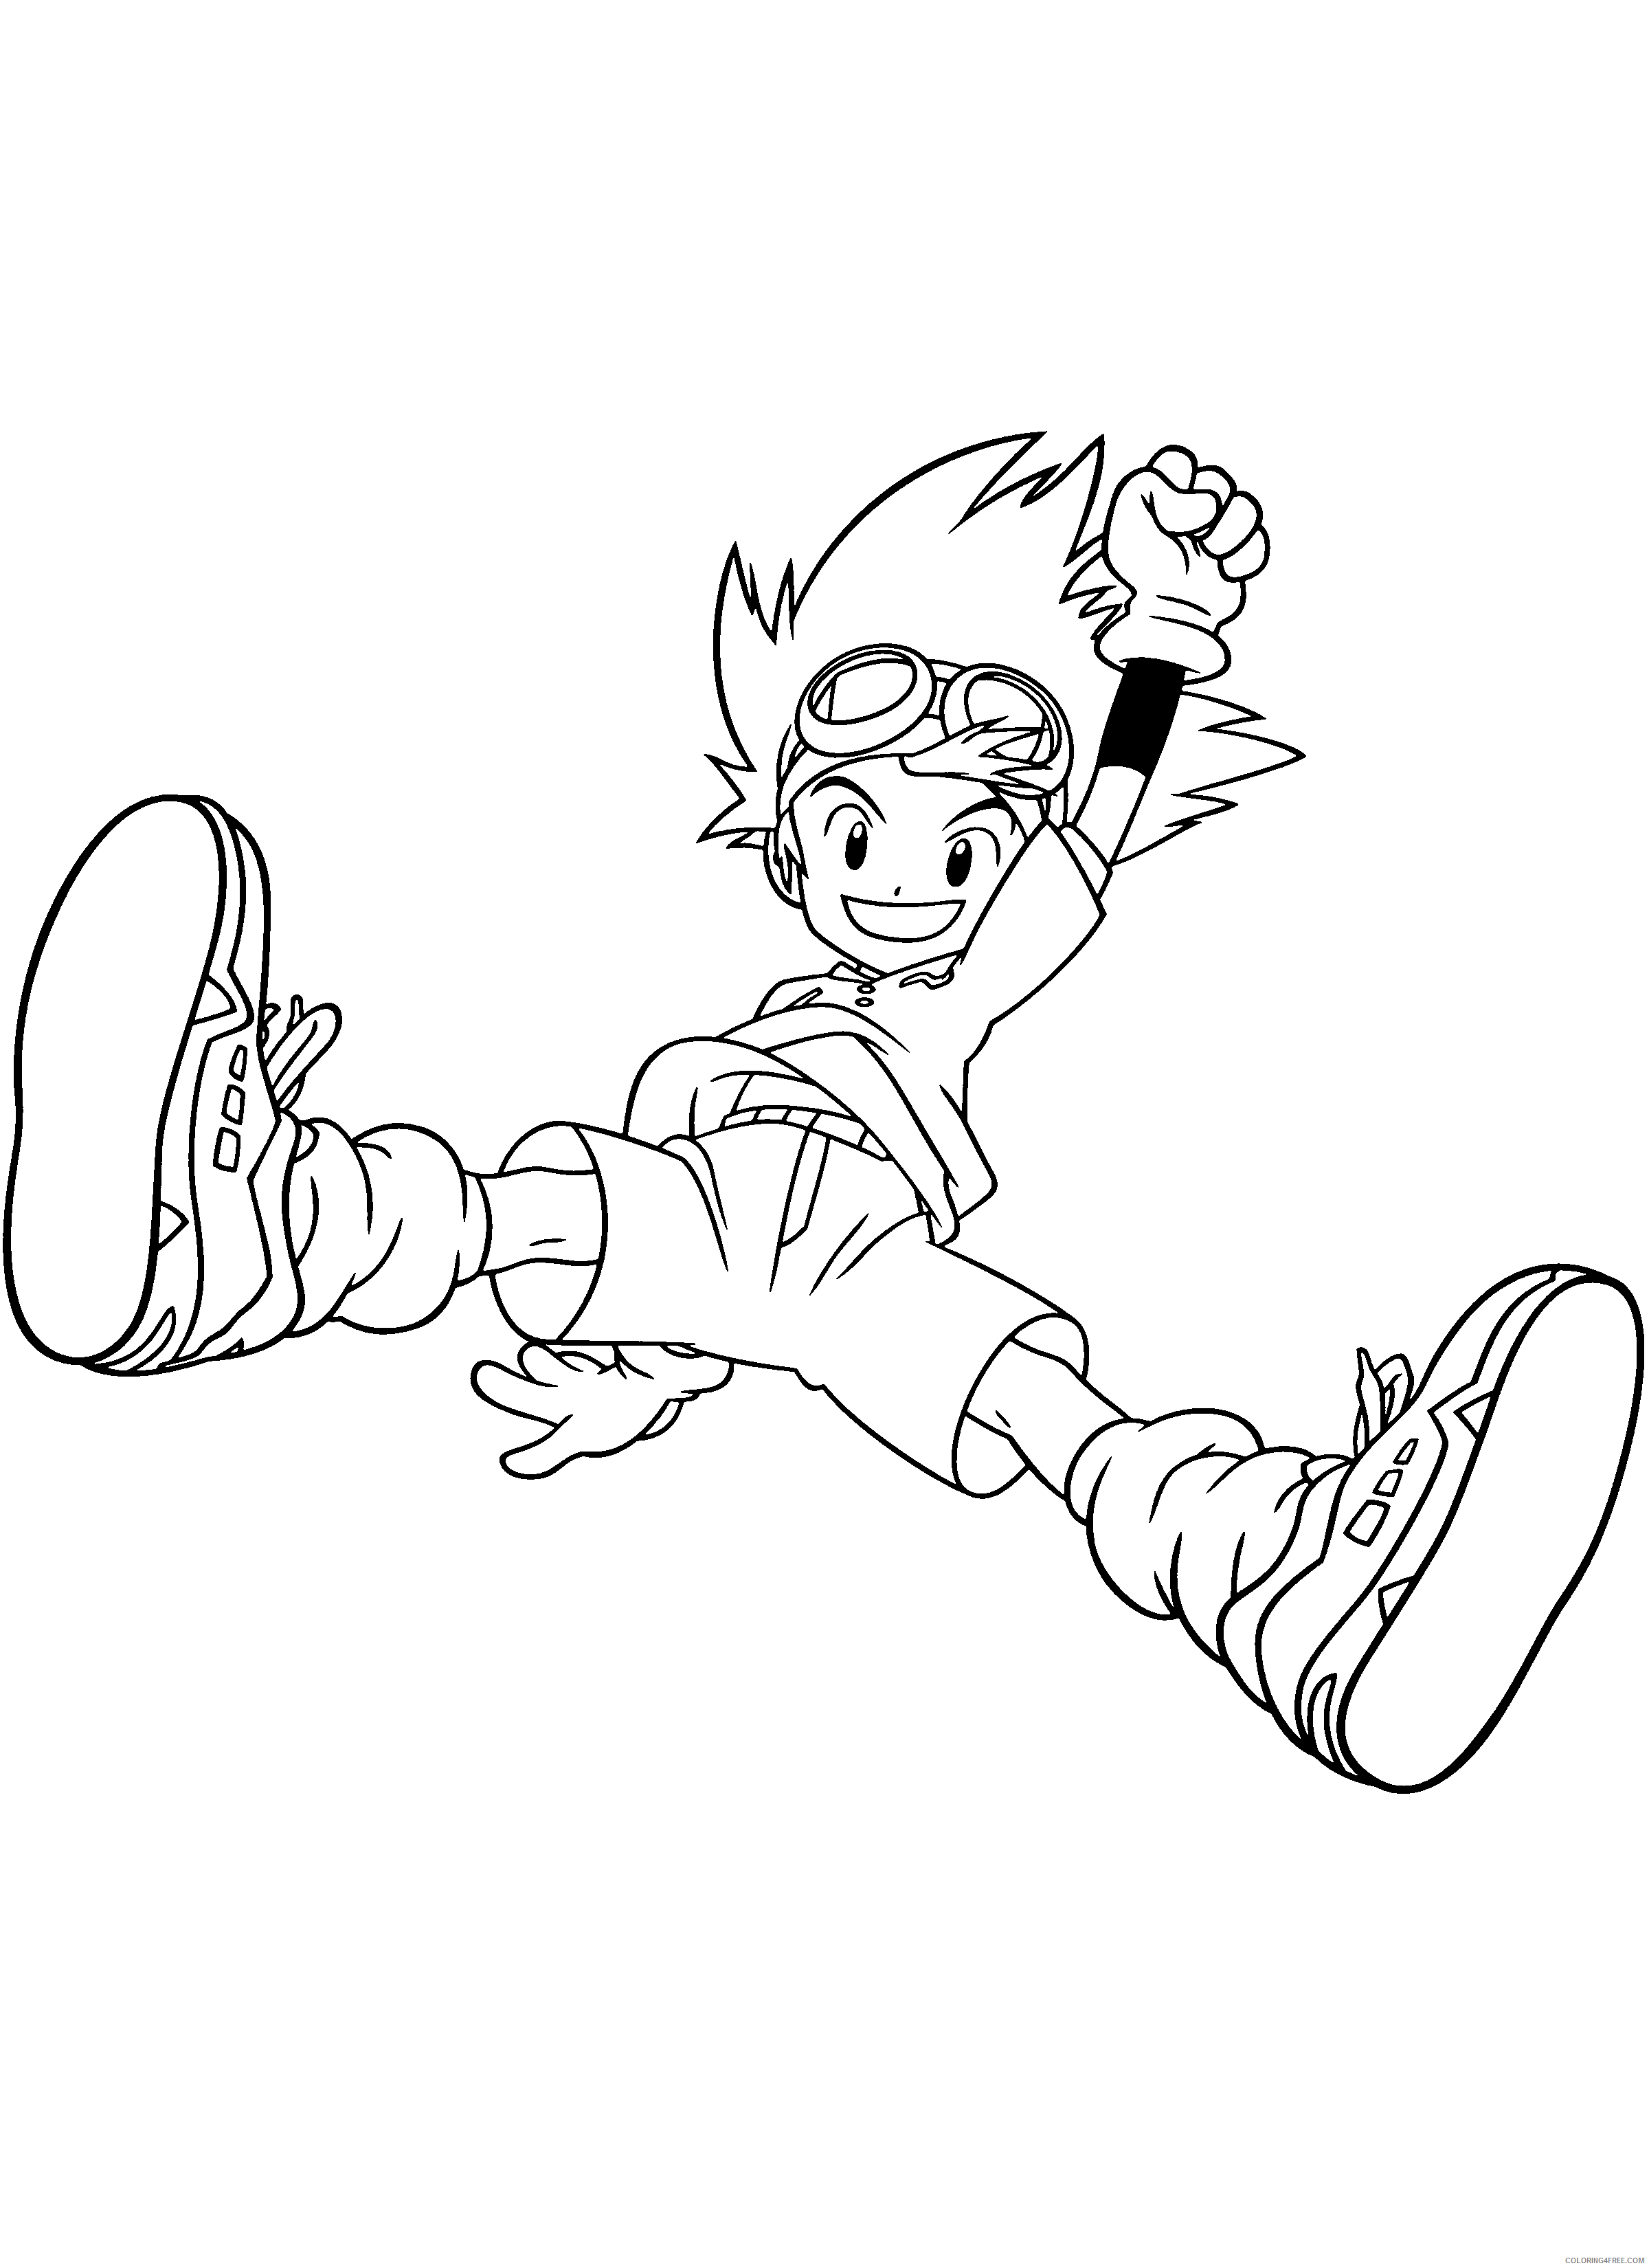 Digimon Printable Coloring Pages Anime digimon 178 2021 0267 Coloring4free